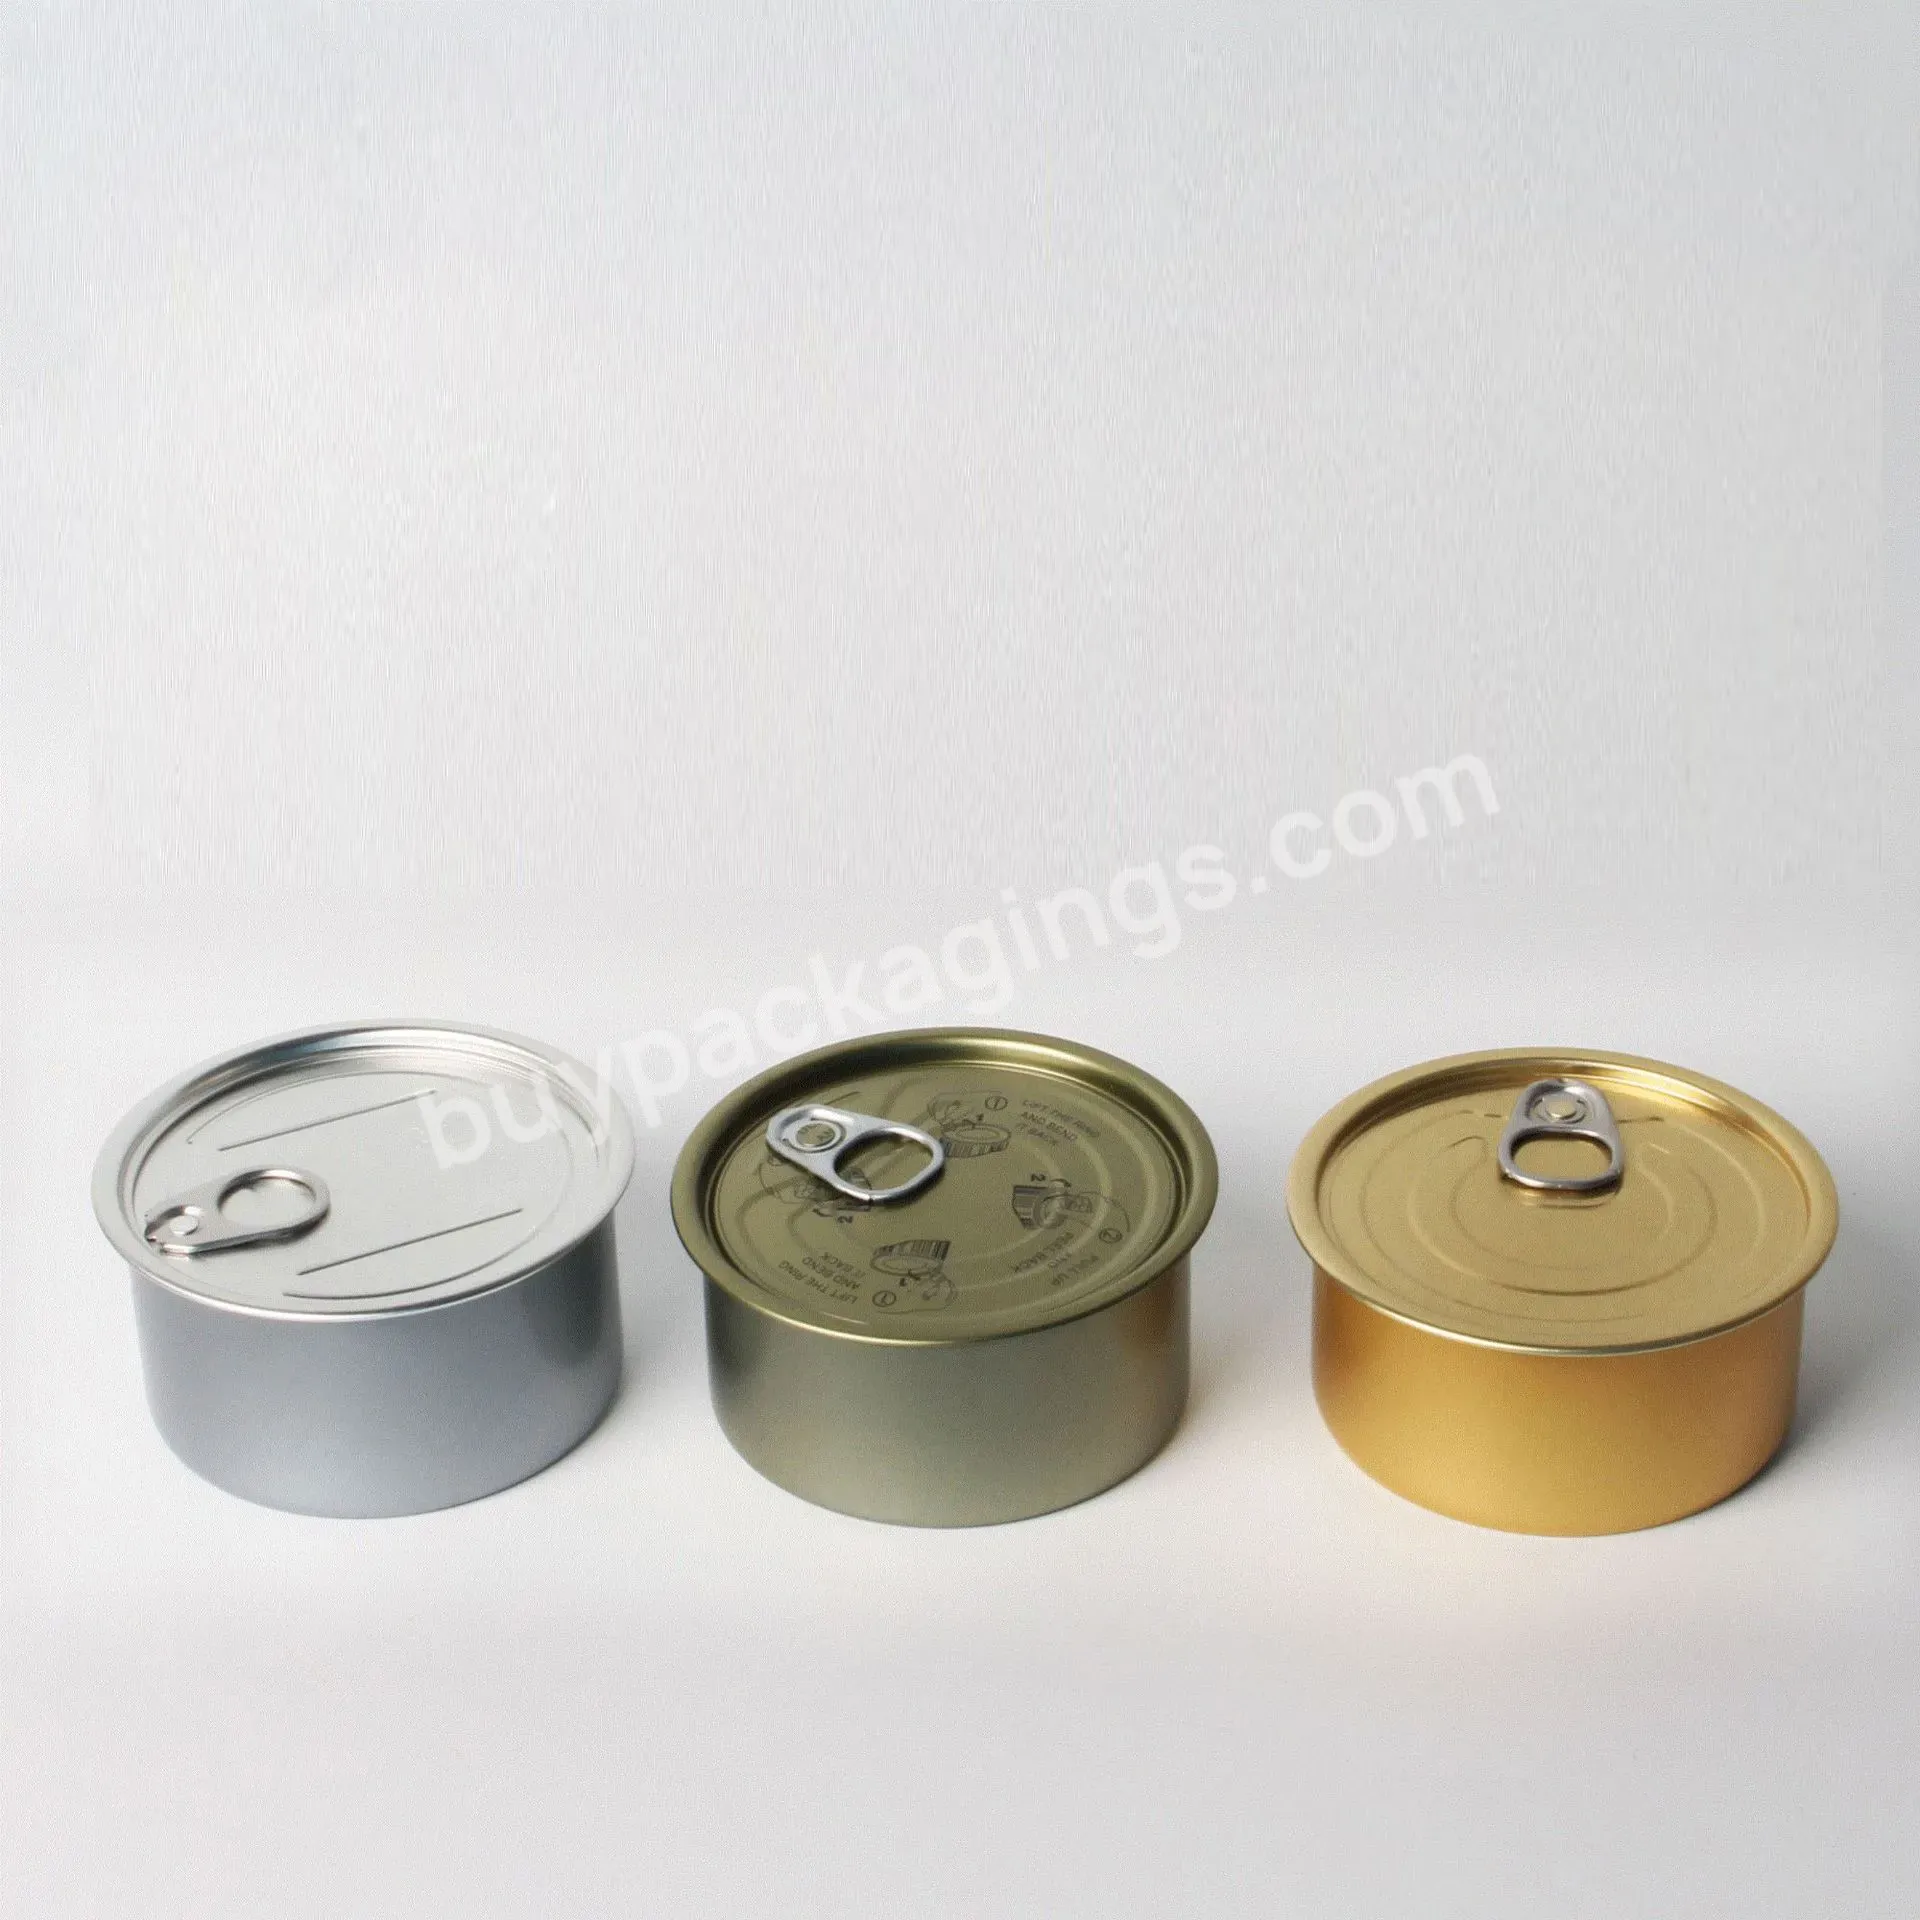 Tinplate Metal Container Empty 85g 170g Tin Cans Wholesale Price With #211 #307 Eoe For Oil Tuna Pet Food Canning - Buy 125ml 125g Custom Print Logo Empty Tin Cans Wholesale 1/4 Club Aluminum Cans With #311 Eoe For Sardines Fish Pilchard,Metal Ring P